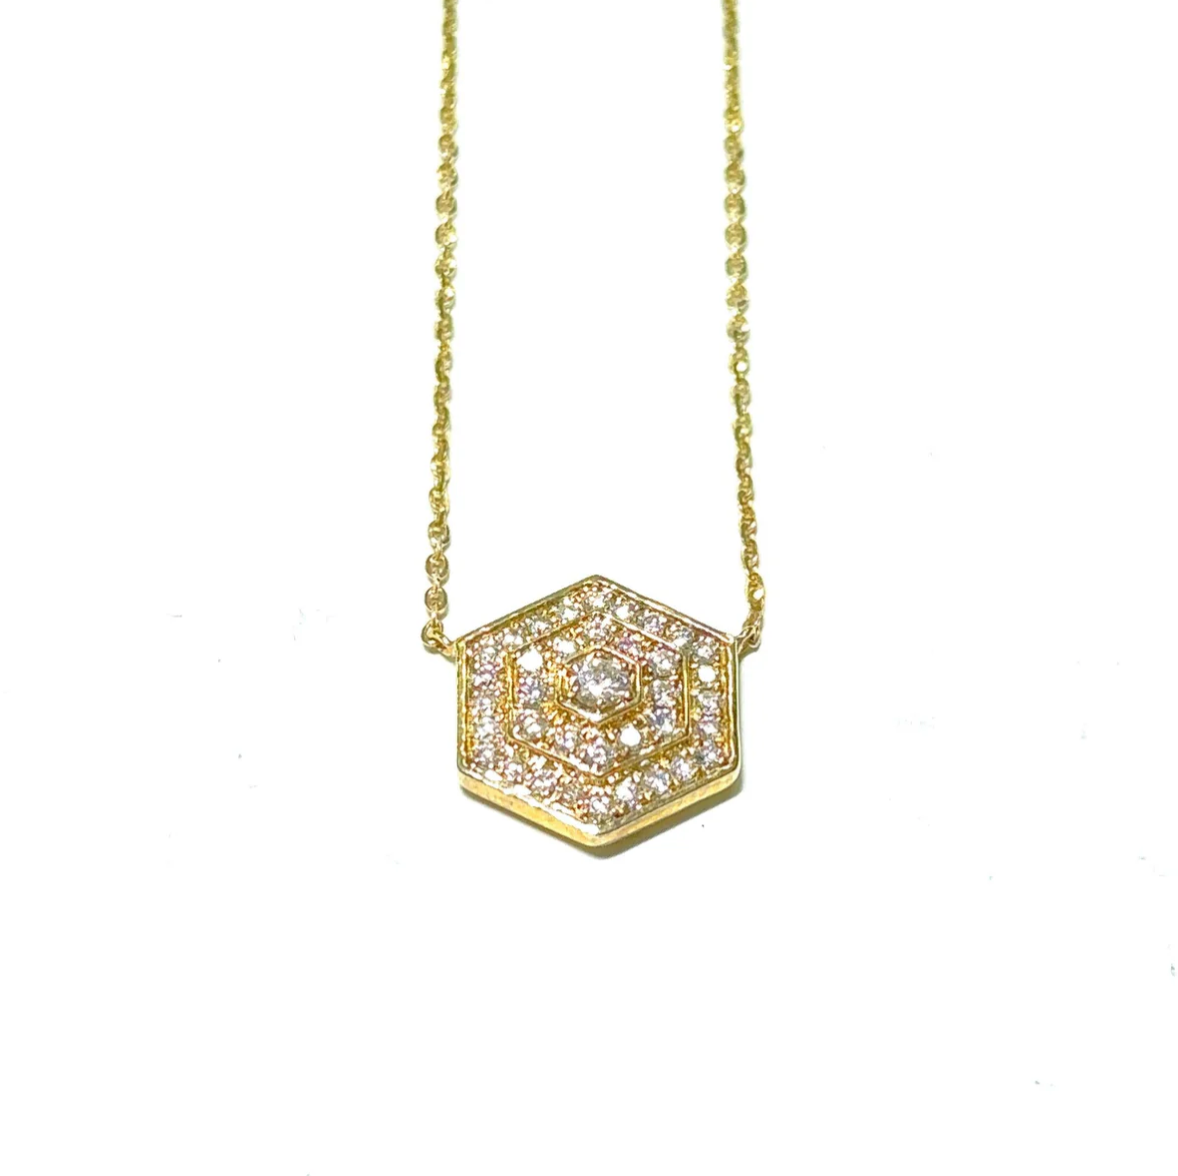 A gold necklace with a hexagon shaped pendant on a chain